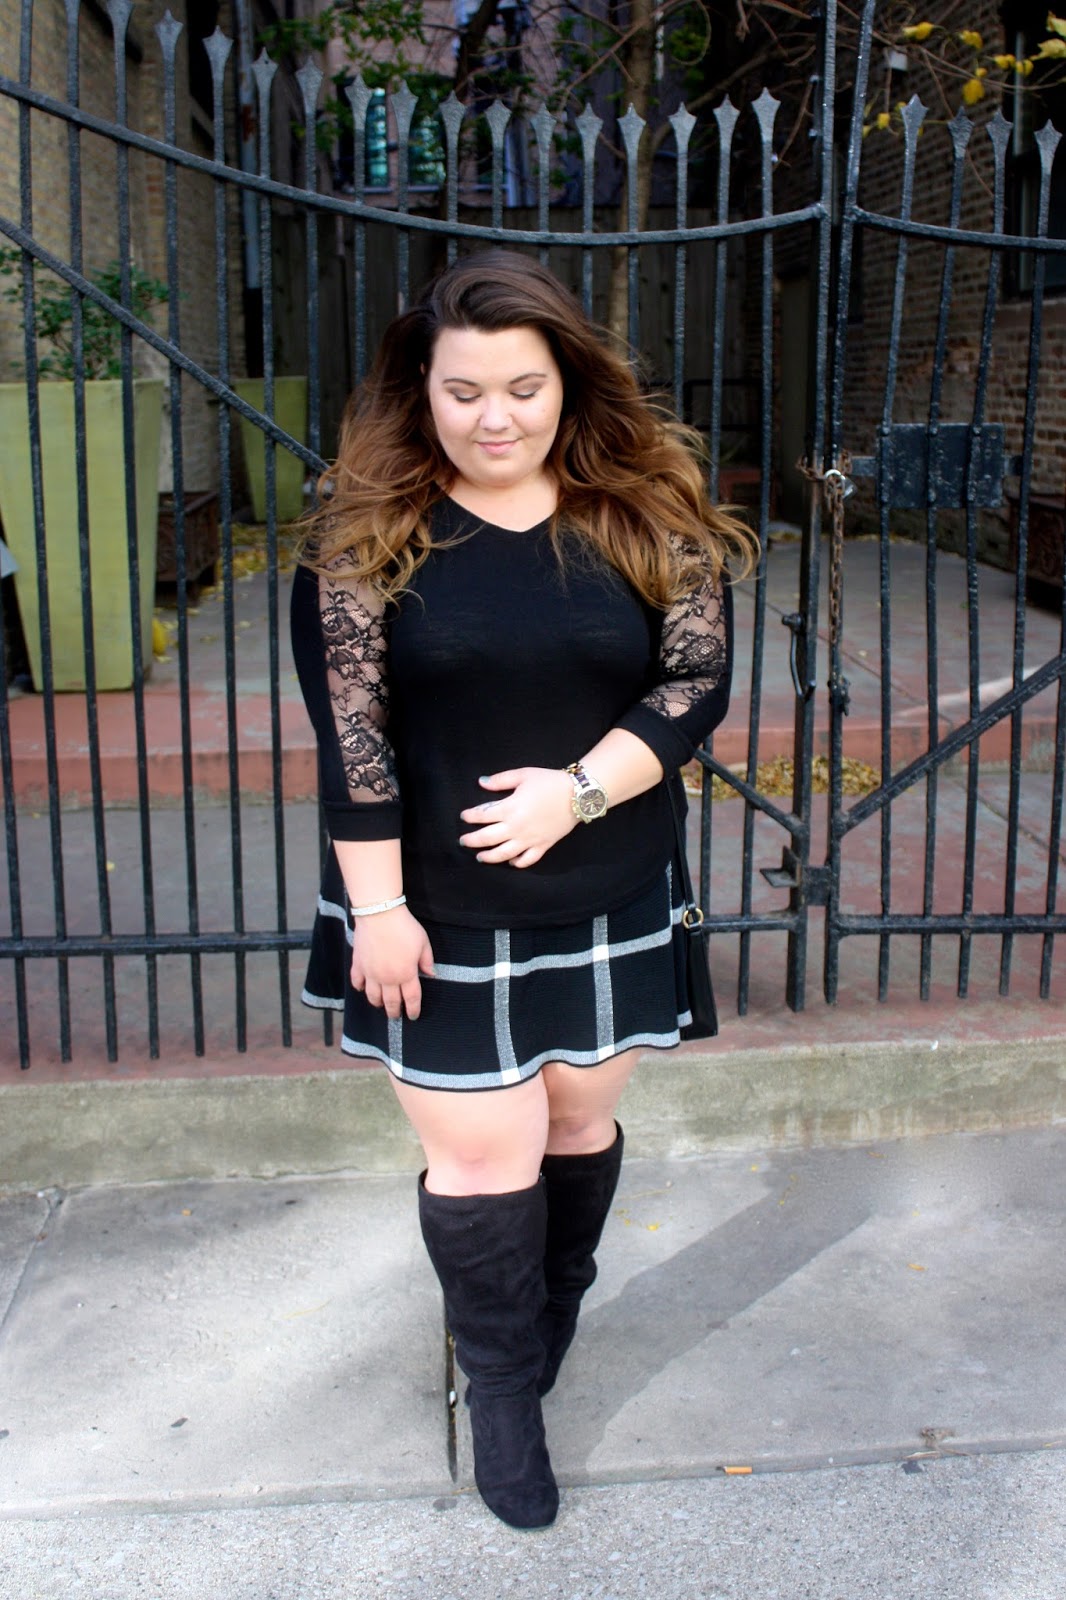 natalie craig, natalie in the city, chicago, windy city, chicago blogger network, windy city blogger, school girl, plaid skirt, sweater skirt, ootd fashion blogger, plus size fashion blogger, ombre, curly hair, lace sleeves, michael kors watch, how to wear boots with a skirt, fall fashion, fatshion, curvy